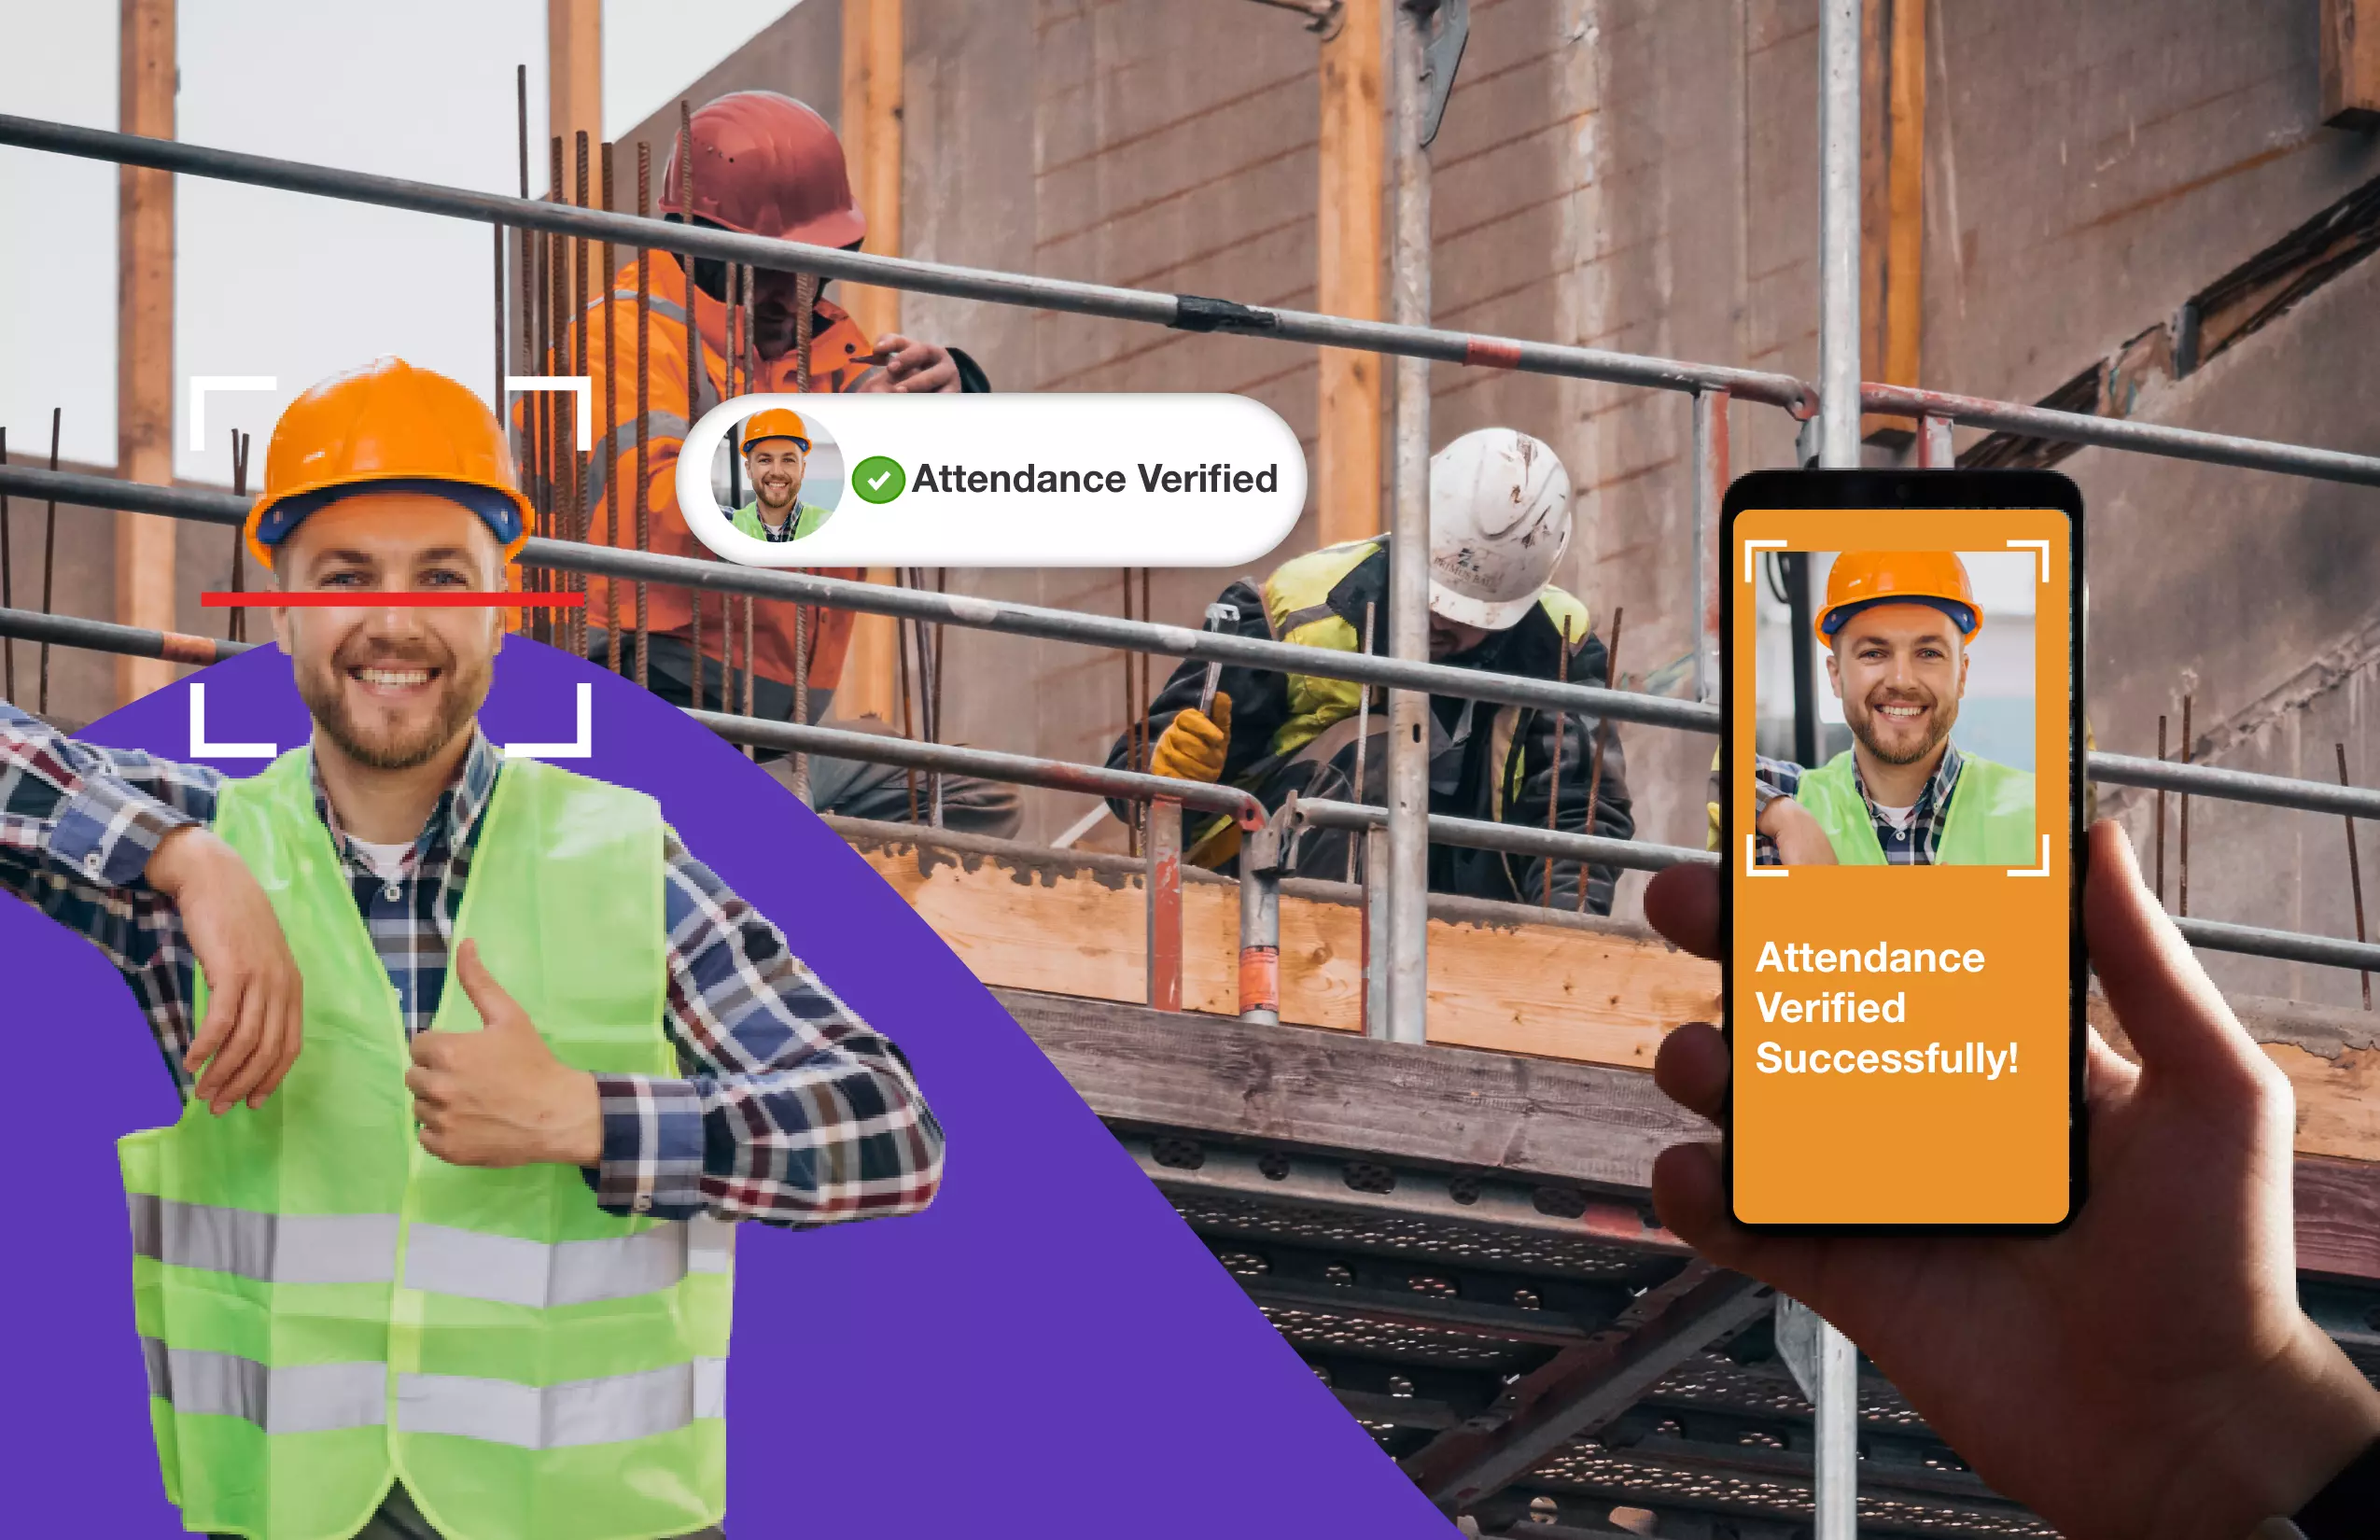 8 Reasons To Use Facial Recognition Attendance System For Industrial Workers